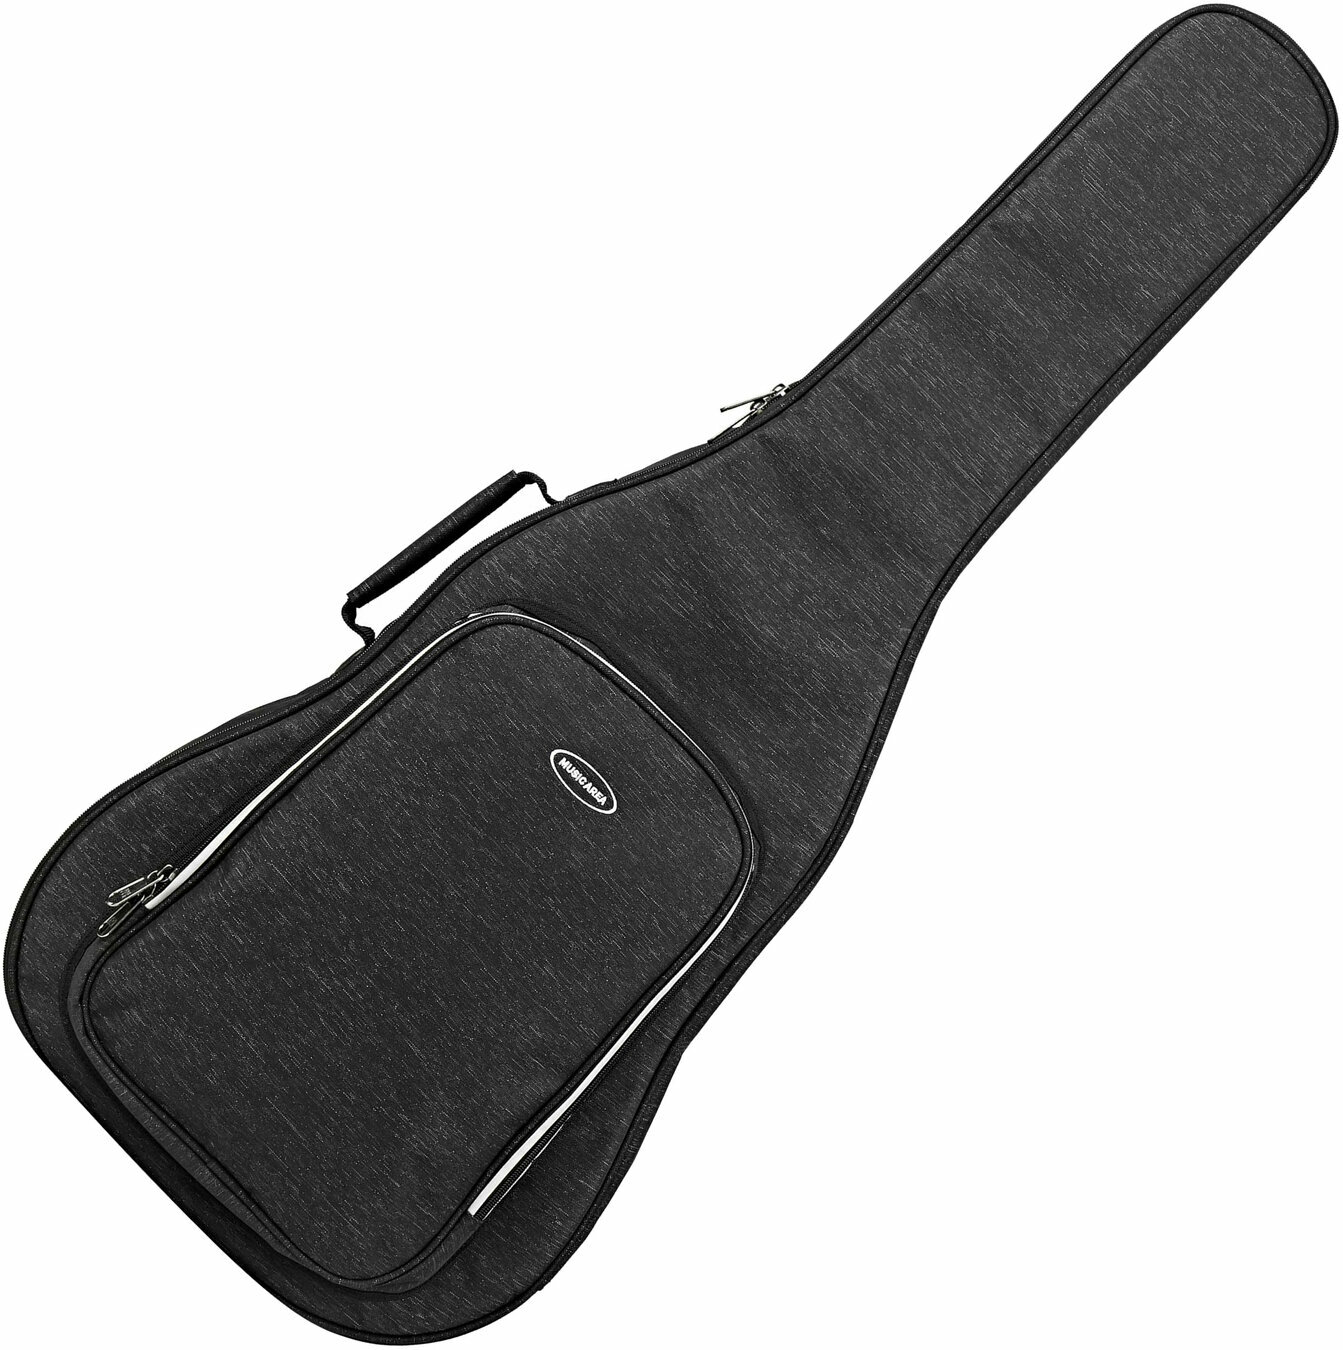 Gigbag for Acoustic Guitar MUSIC AREA RB10 Acoustic Guitar Gigbag for Acoustic Guitar Black